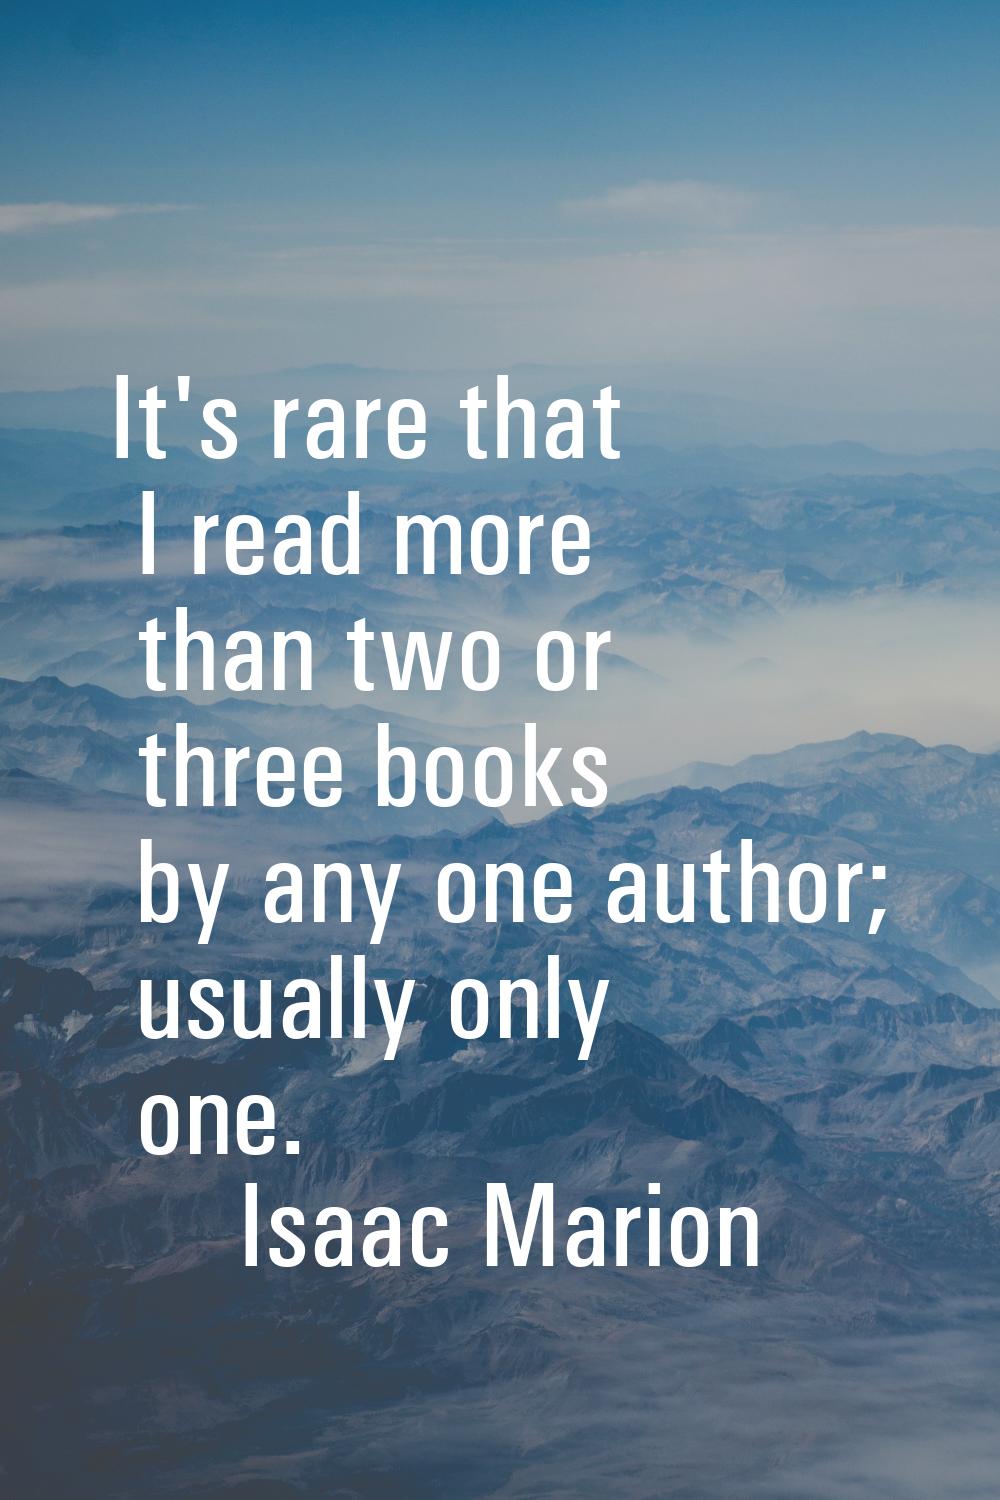 It's rare that I read more than two or three books by any one author; usually only one.